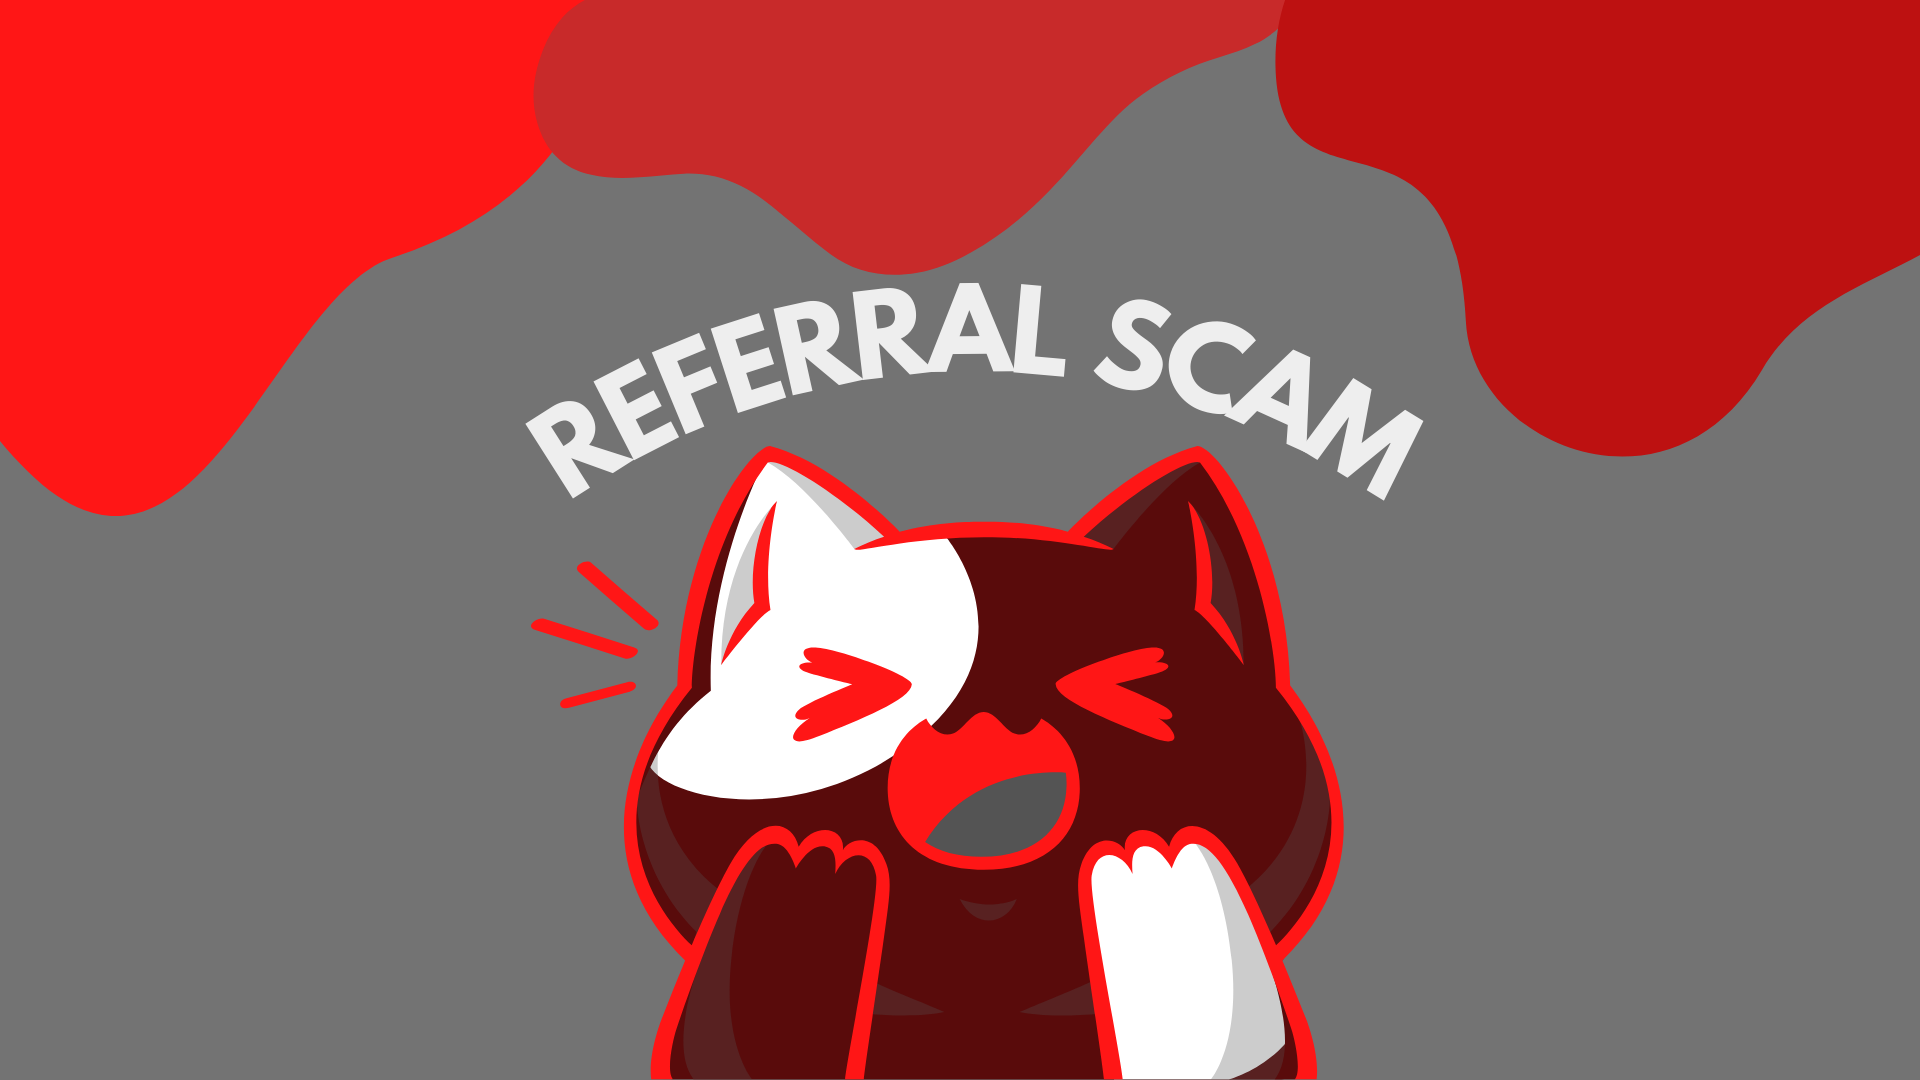 Using Referral Scam